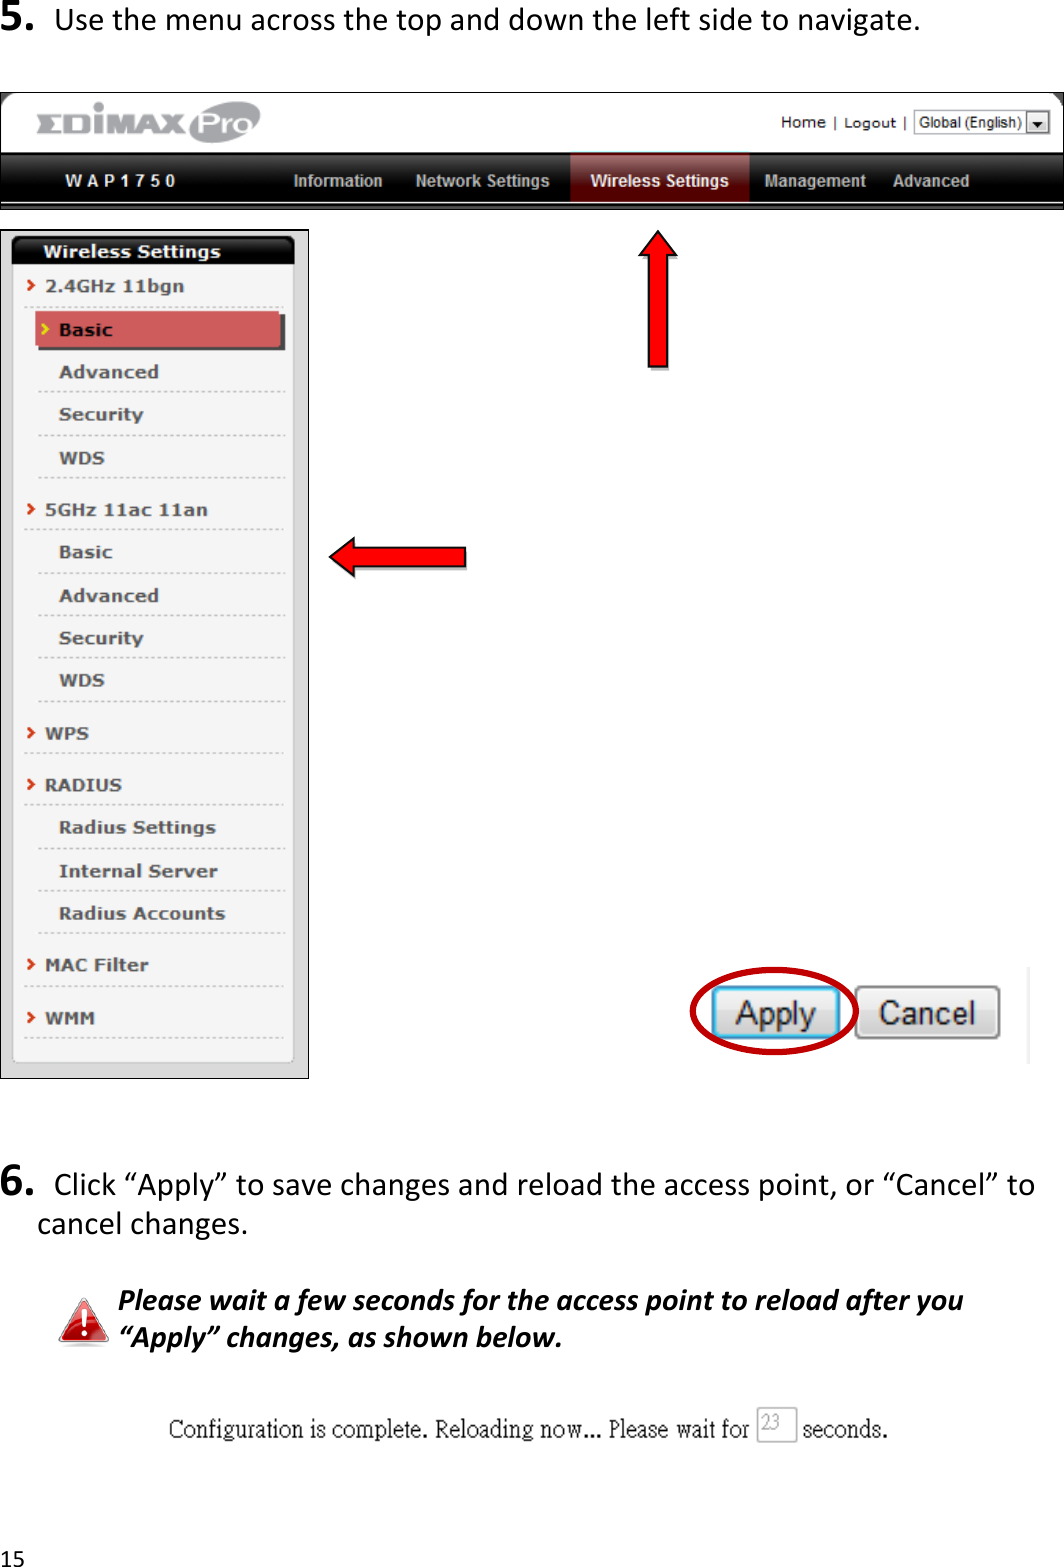 15  5.   Use the menu across the top and down the left side to navigate.                                                                                                                  6.  Click “Apply” to save changes and reload the access point, or “Cancel” to cancel changes.  Please wait a few seconds for the access point to reload after you “Apply” changes, as shown below.    